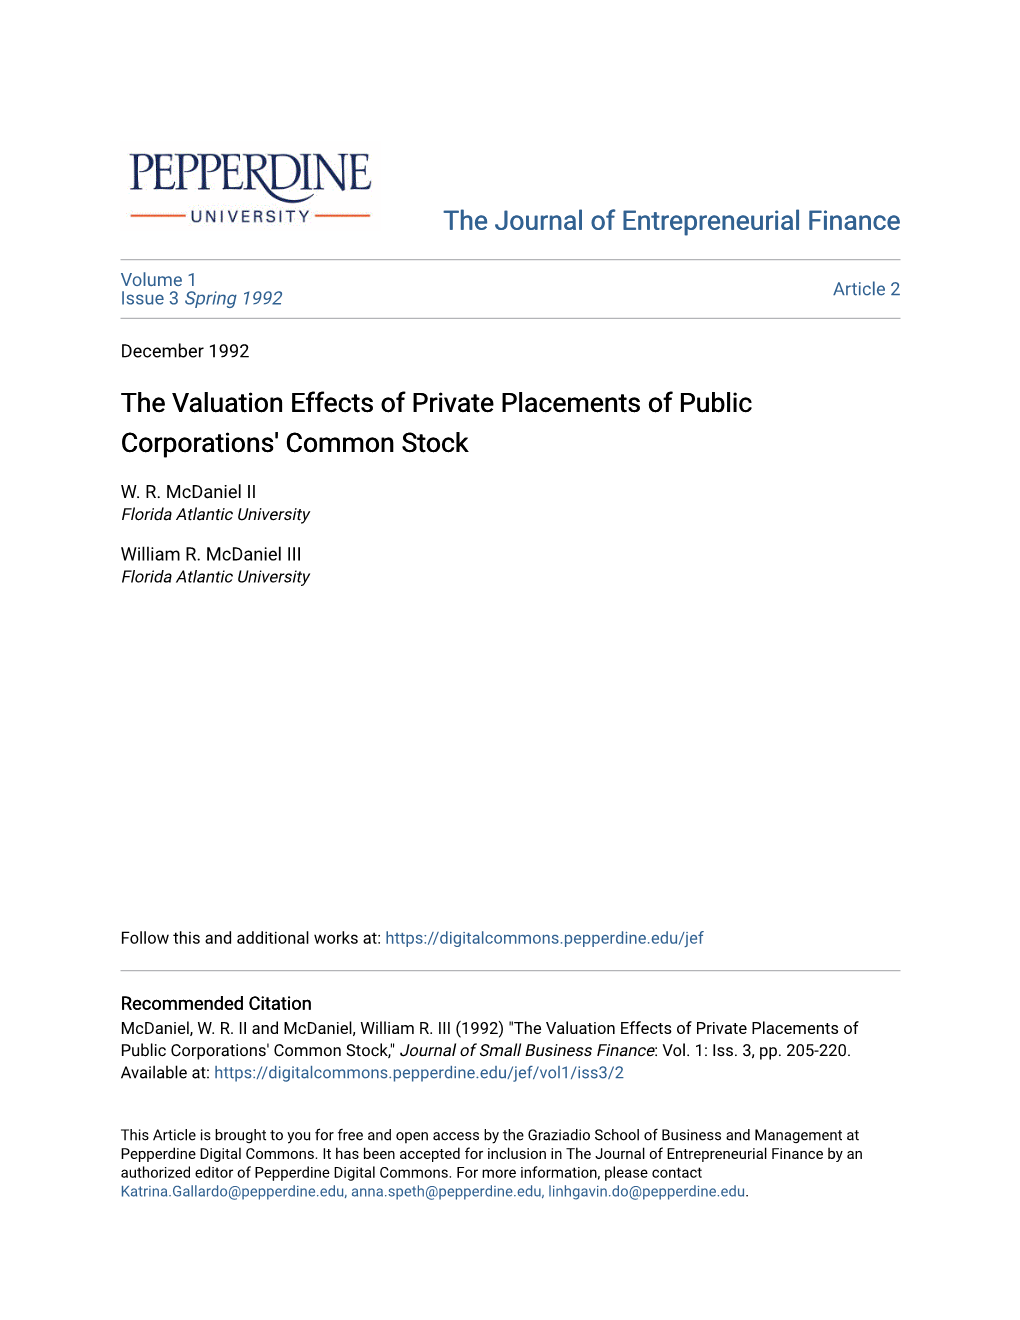 The Valuation Effects of Private Placements of Public Corporations' Common Stock